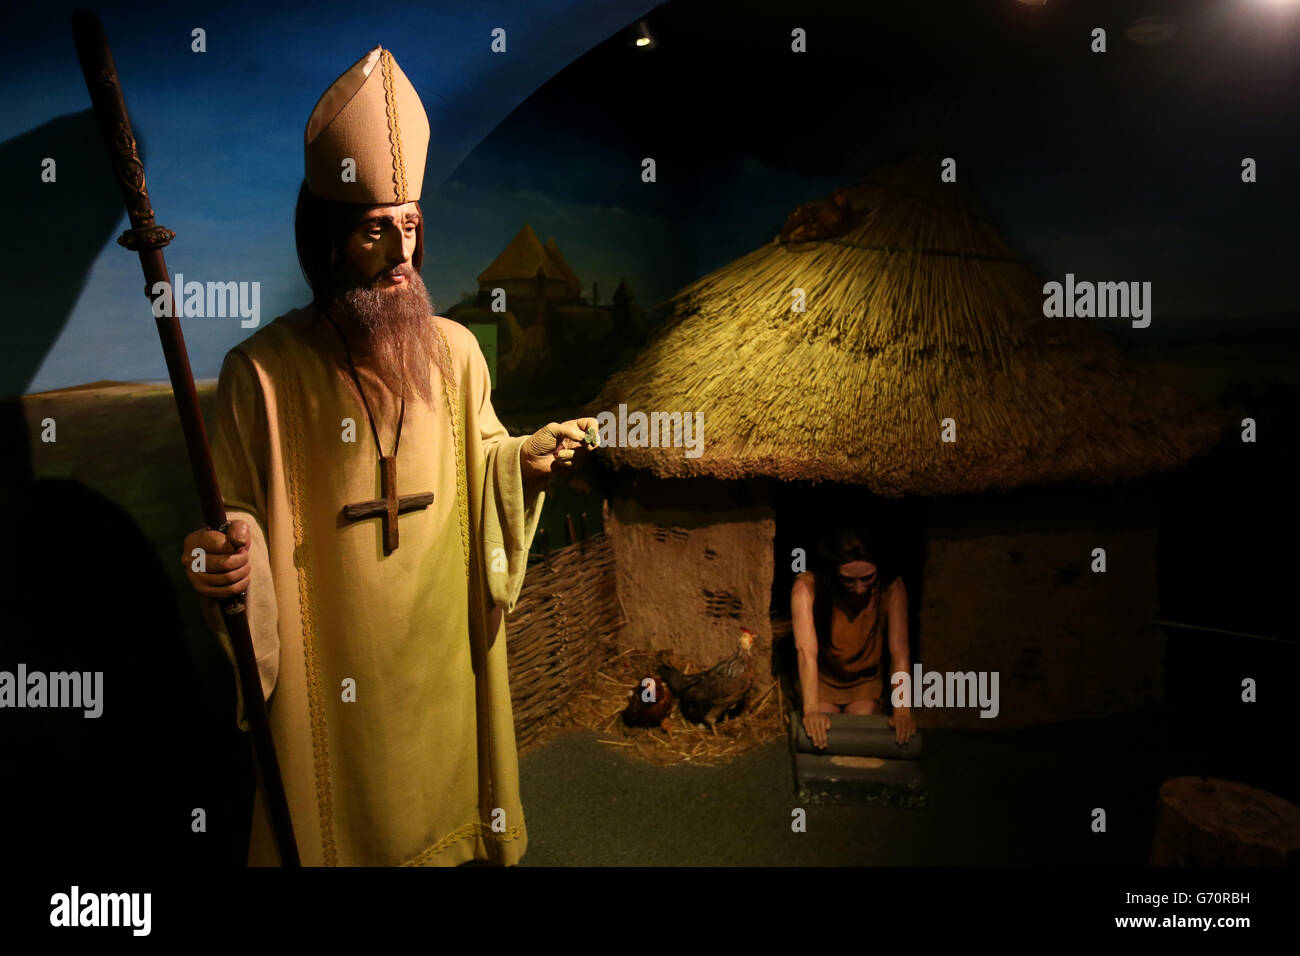 Wax work of St. Patrick at the Wax museum, Dublin. Stock Photo